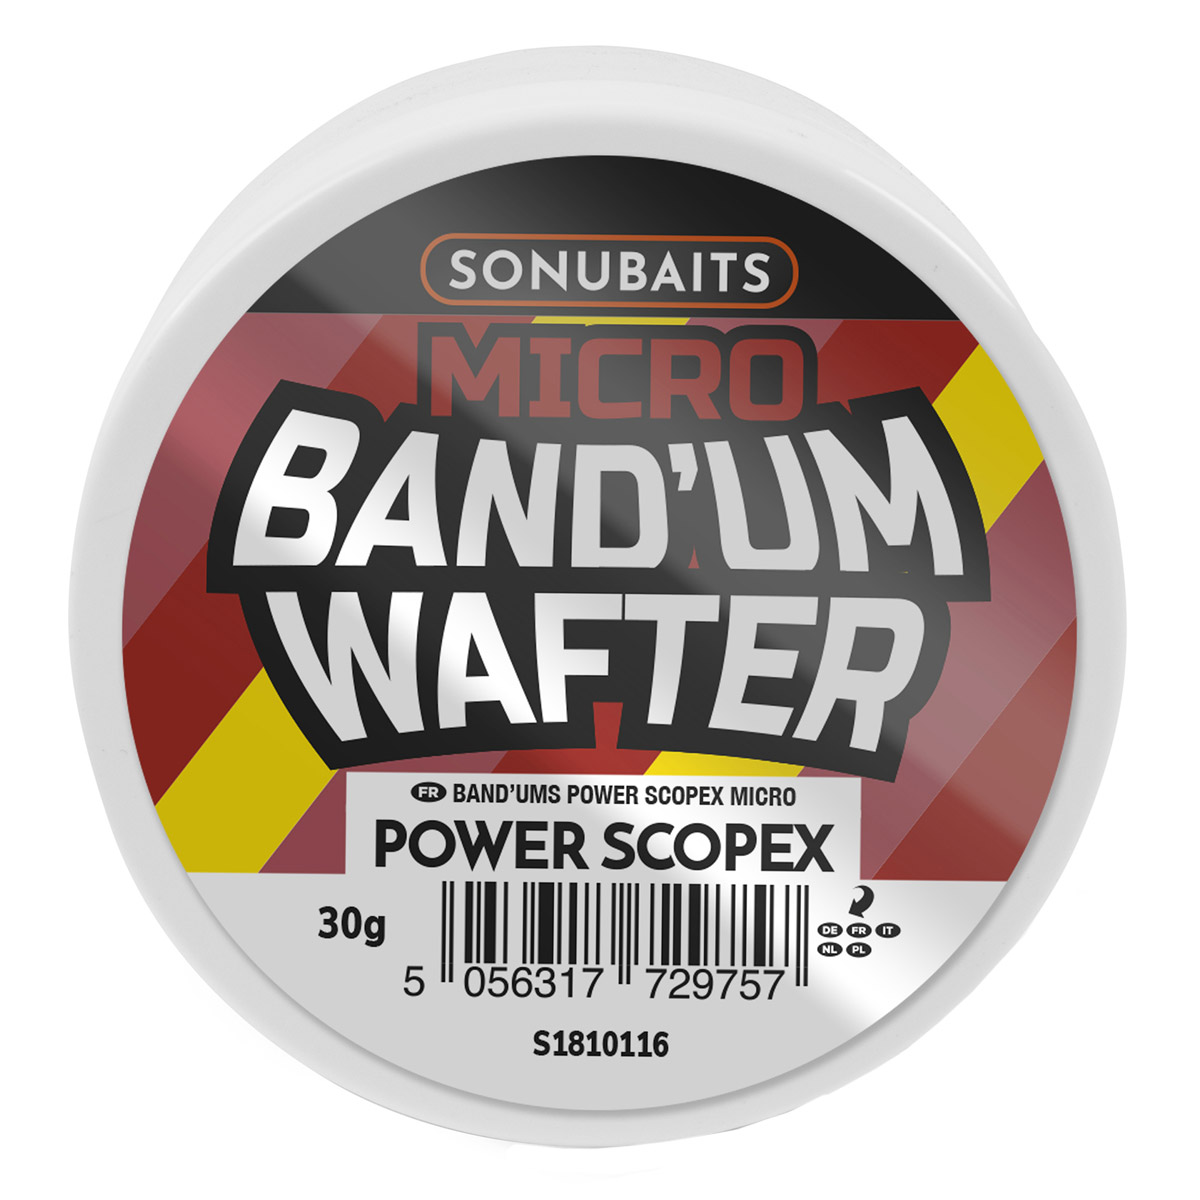 Sonubaits Micro Band'um Wafter Power Scopex